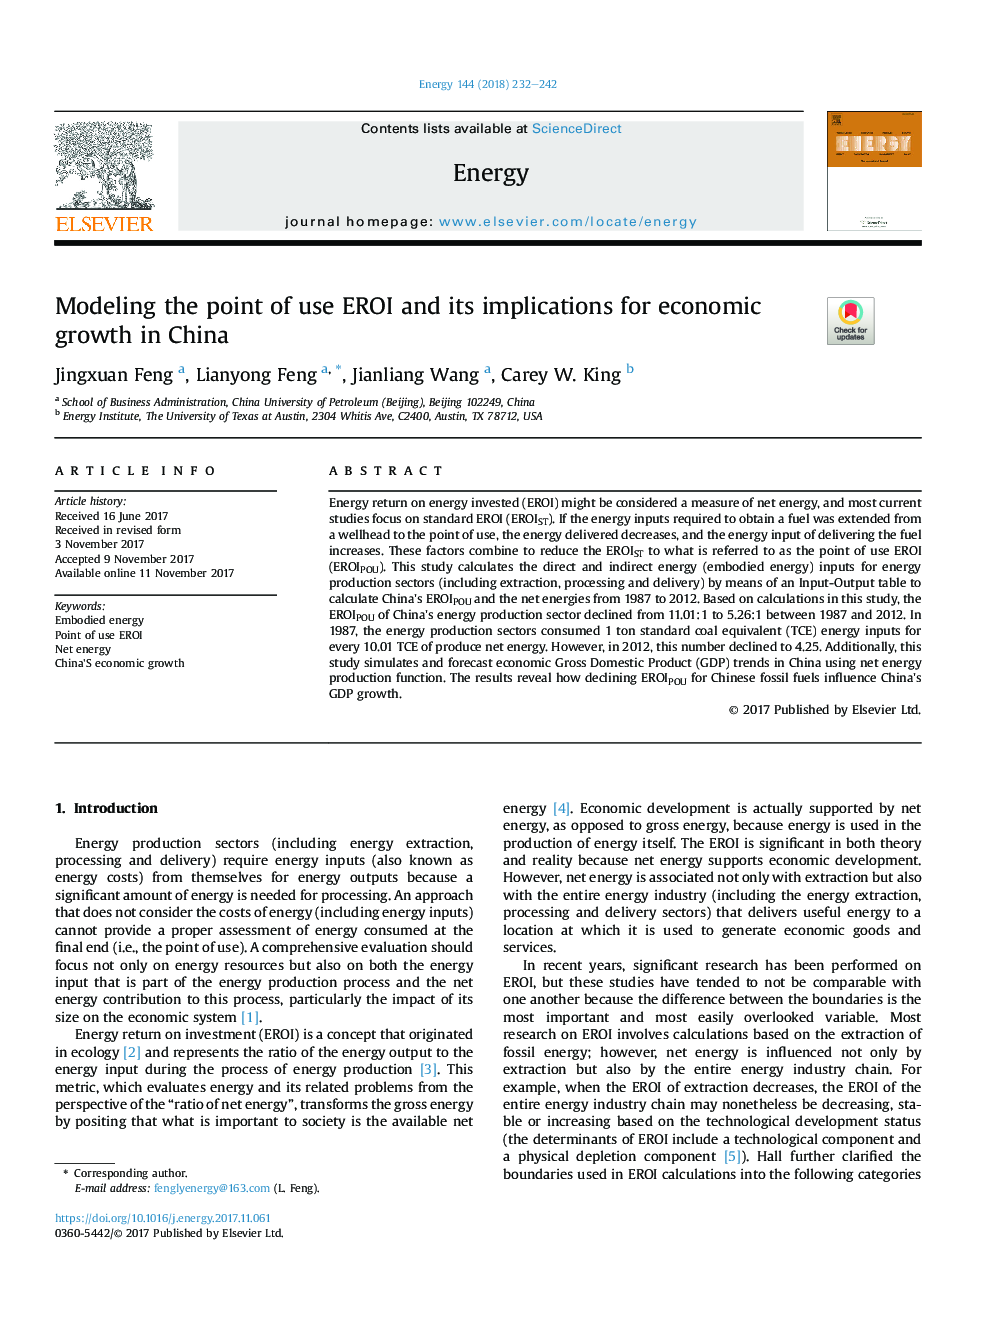 Modeling the point of use EROI and its implications for economic growth in China